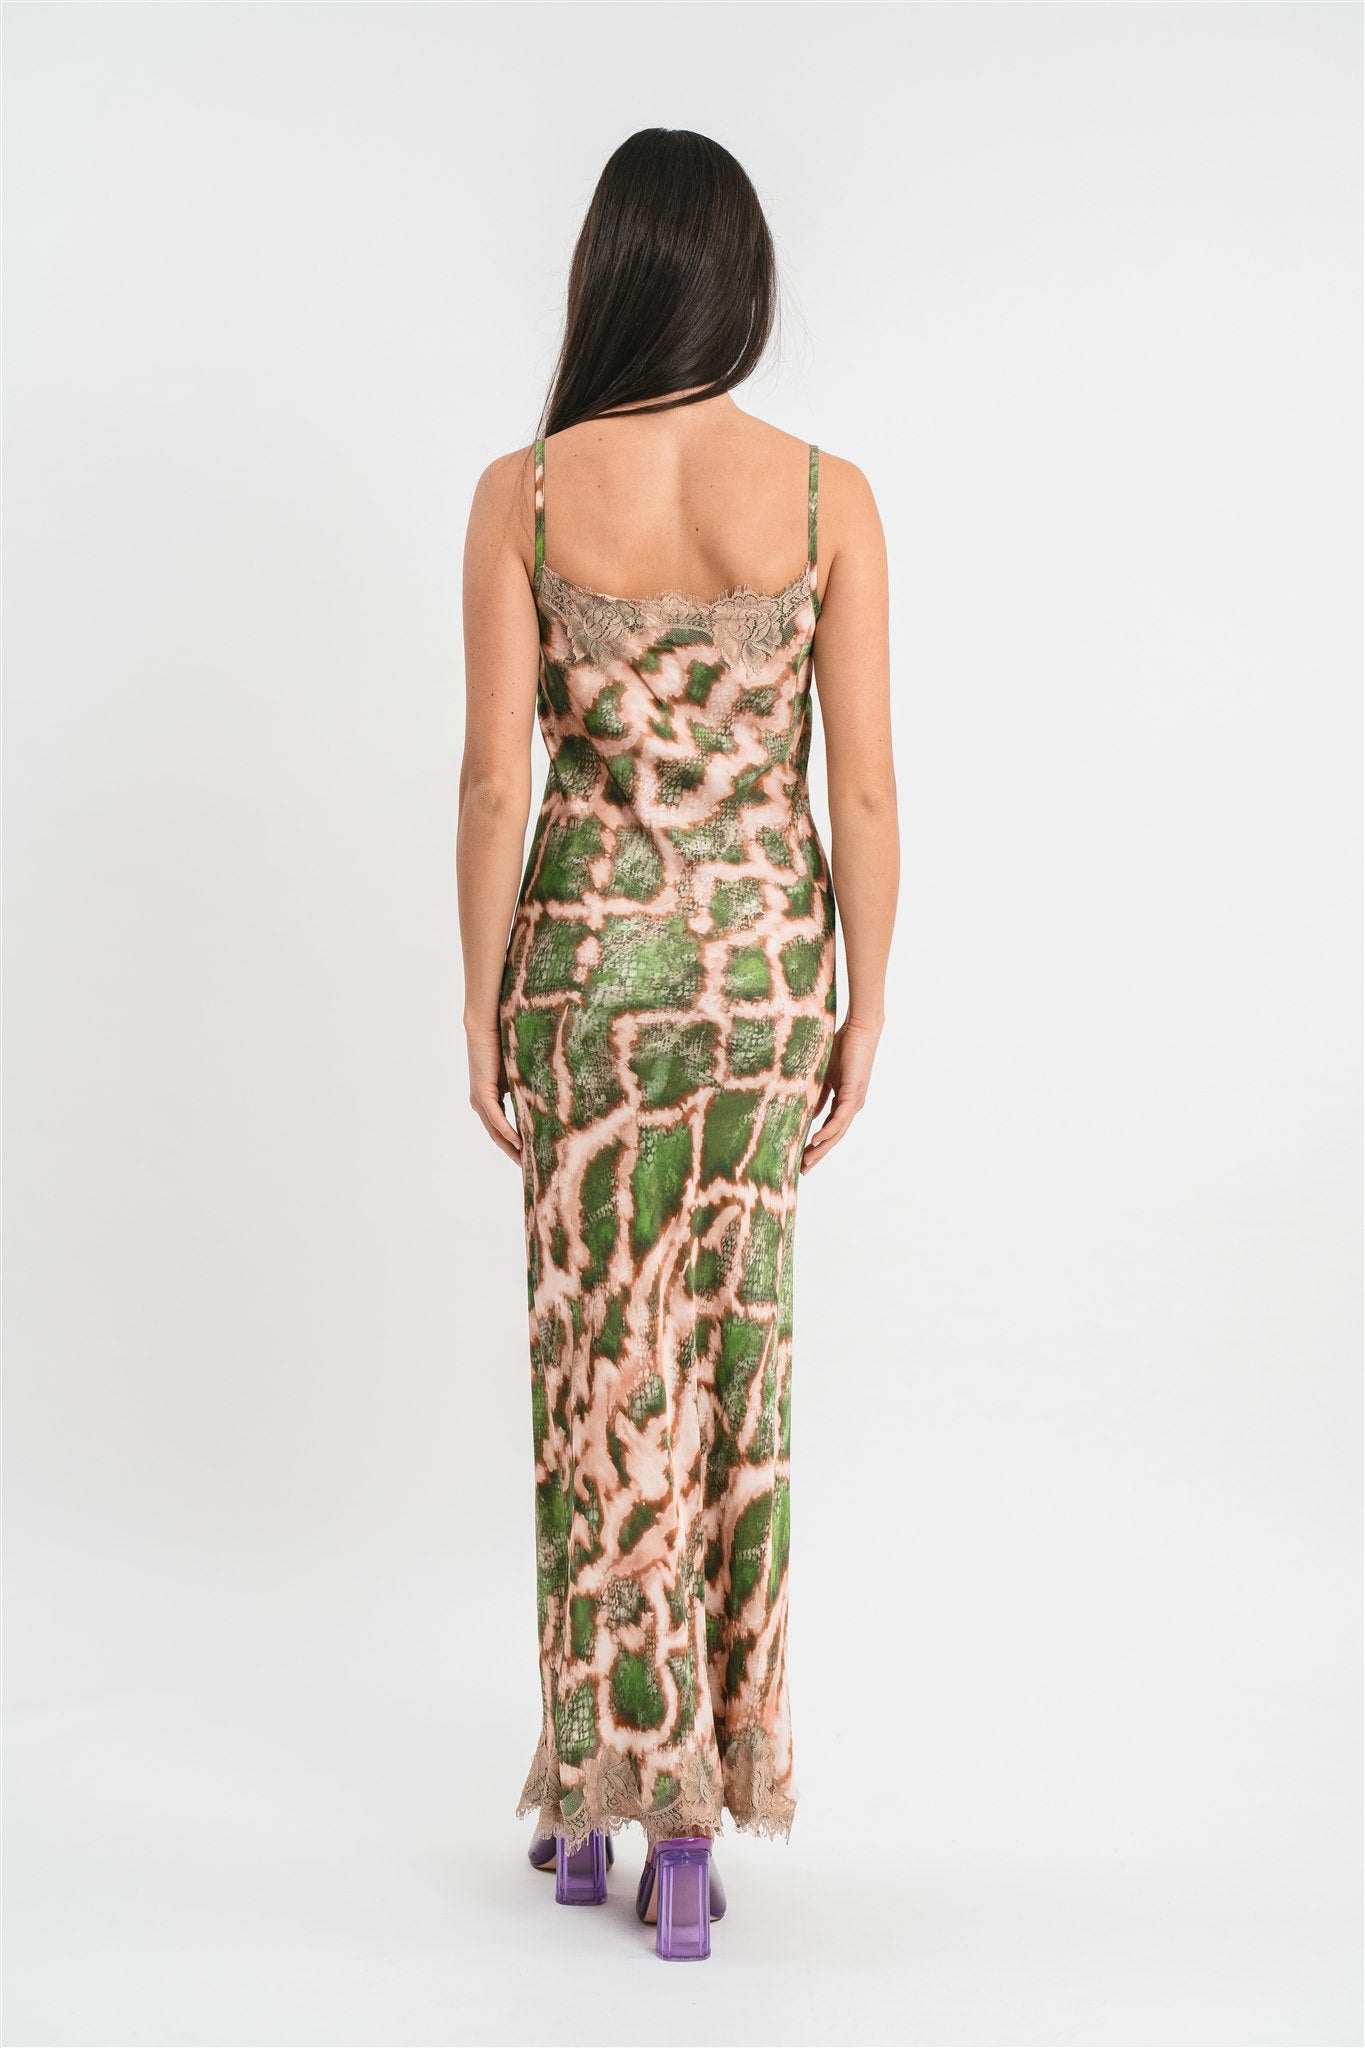 Animal print slip dress with lace details